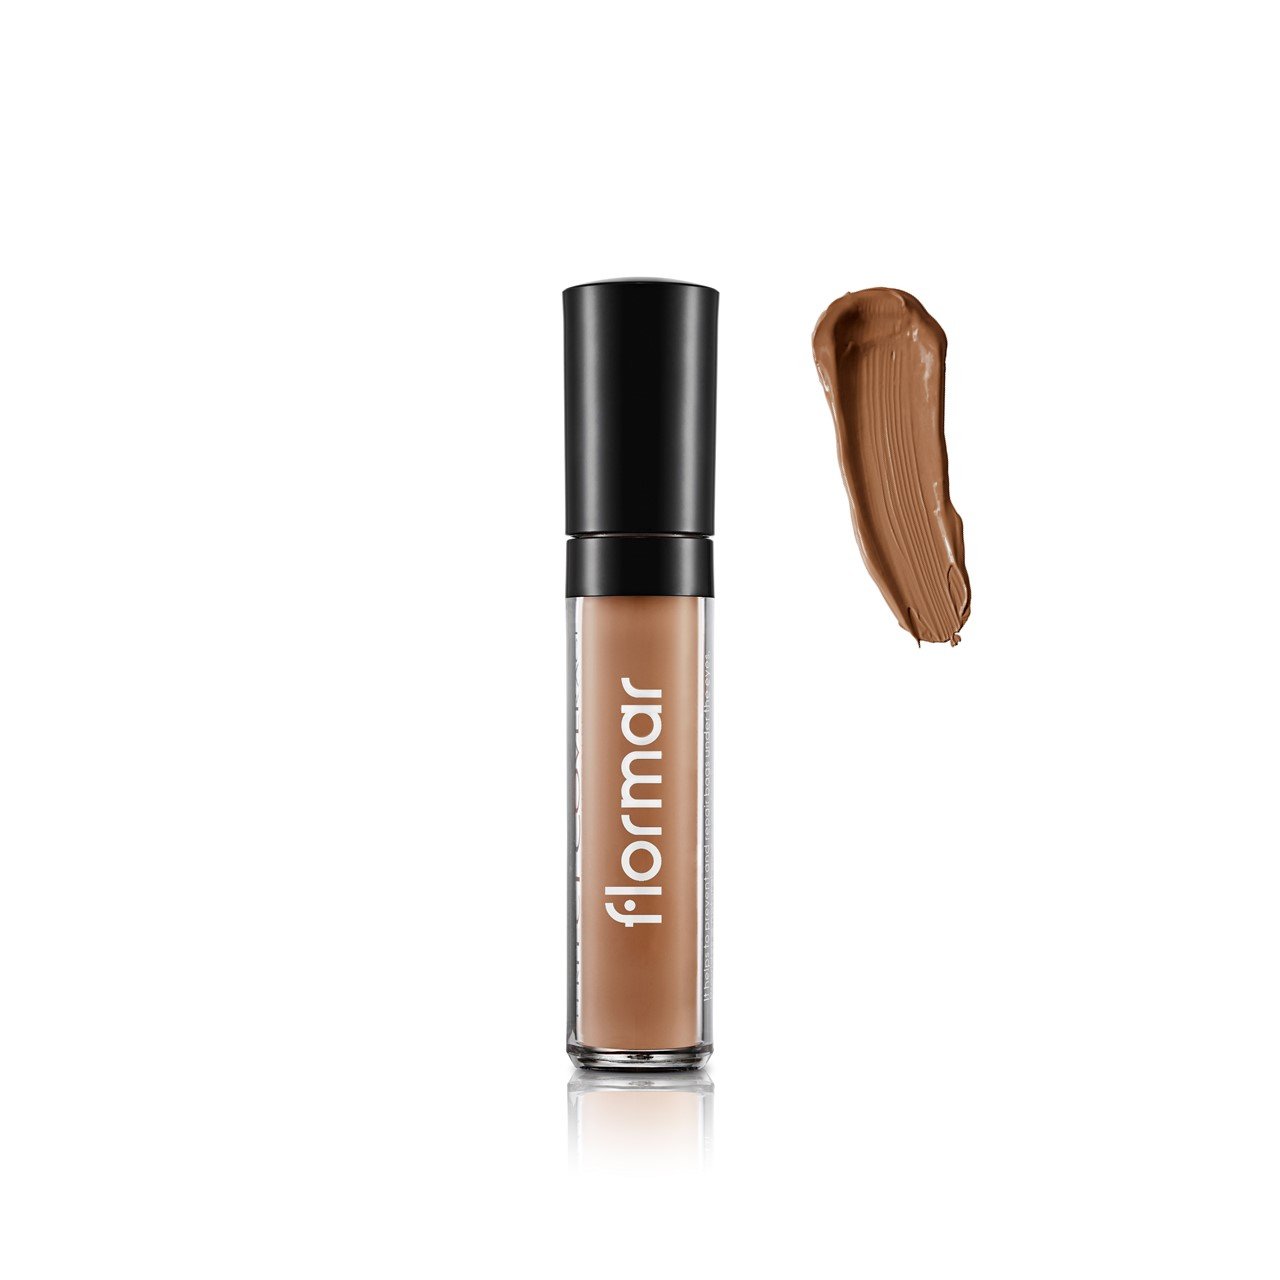 https://static.beautytocare.com/cdn-cgi/image/width=1600,height=1600,f=auto/media/catalog/product//f/l/flormar-perfect-coverage-liquid-concealer-53-toffee-5ml_1.jpg